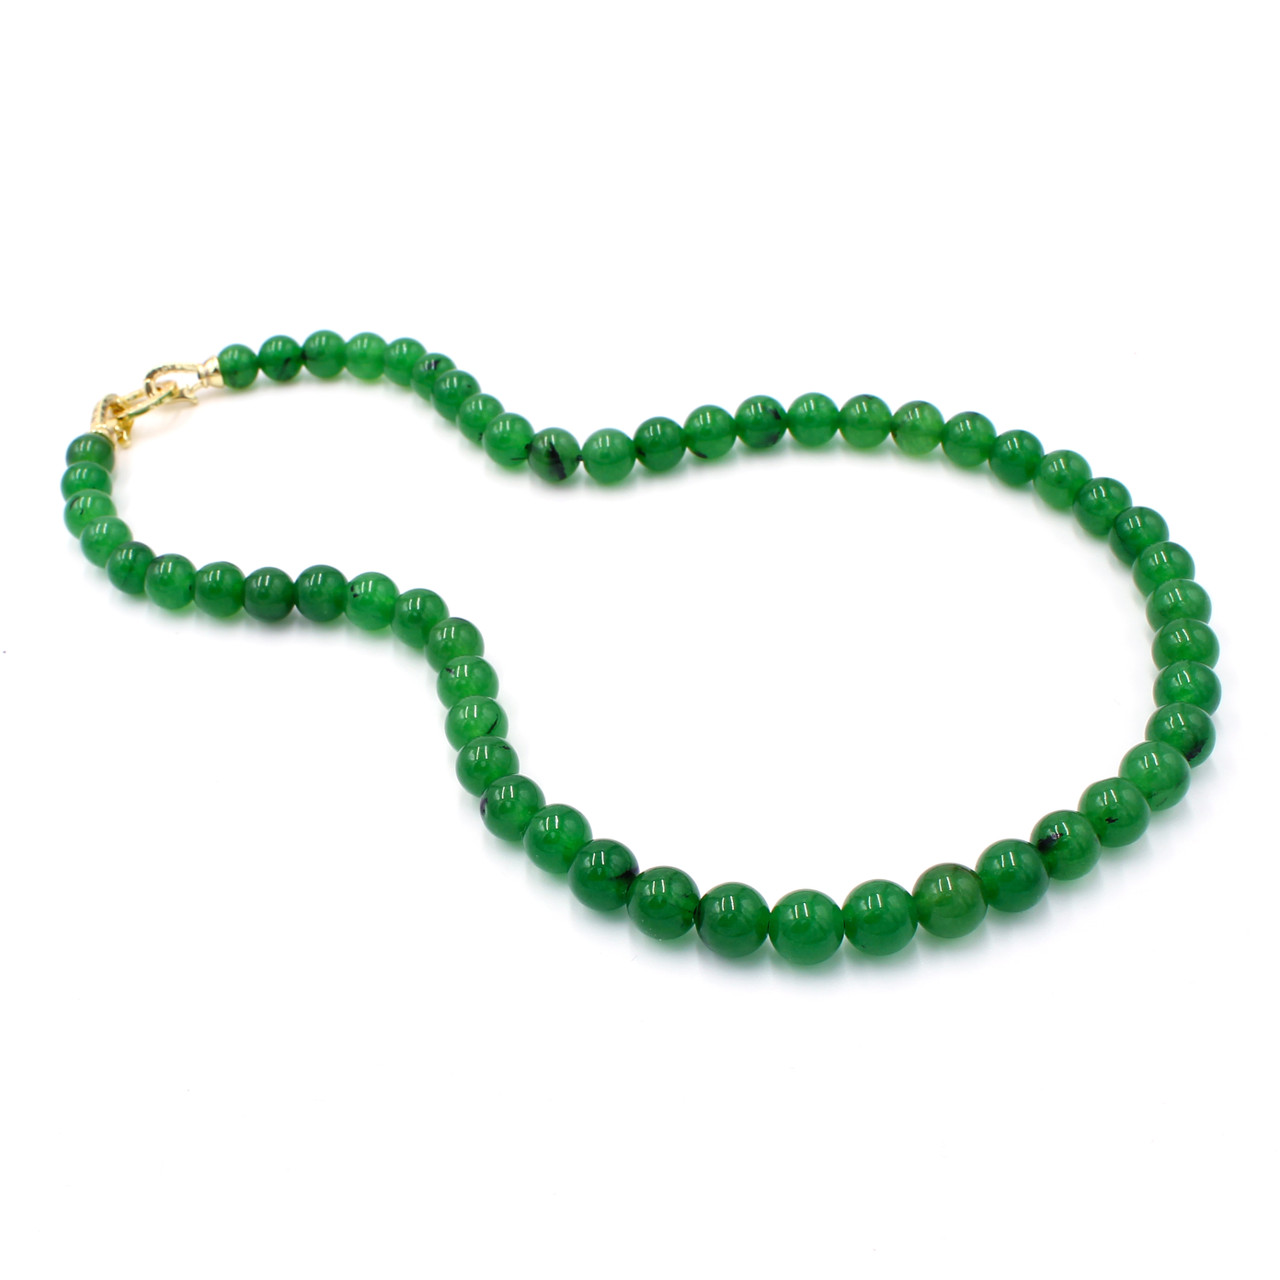 MINGS HAWAII 1950 GREEN JADE BEACH 14KY GOLD NECKLACE AND LARGE MOTTLED  PENDANT - Hawaii Estate & Jewelry Buyers